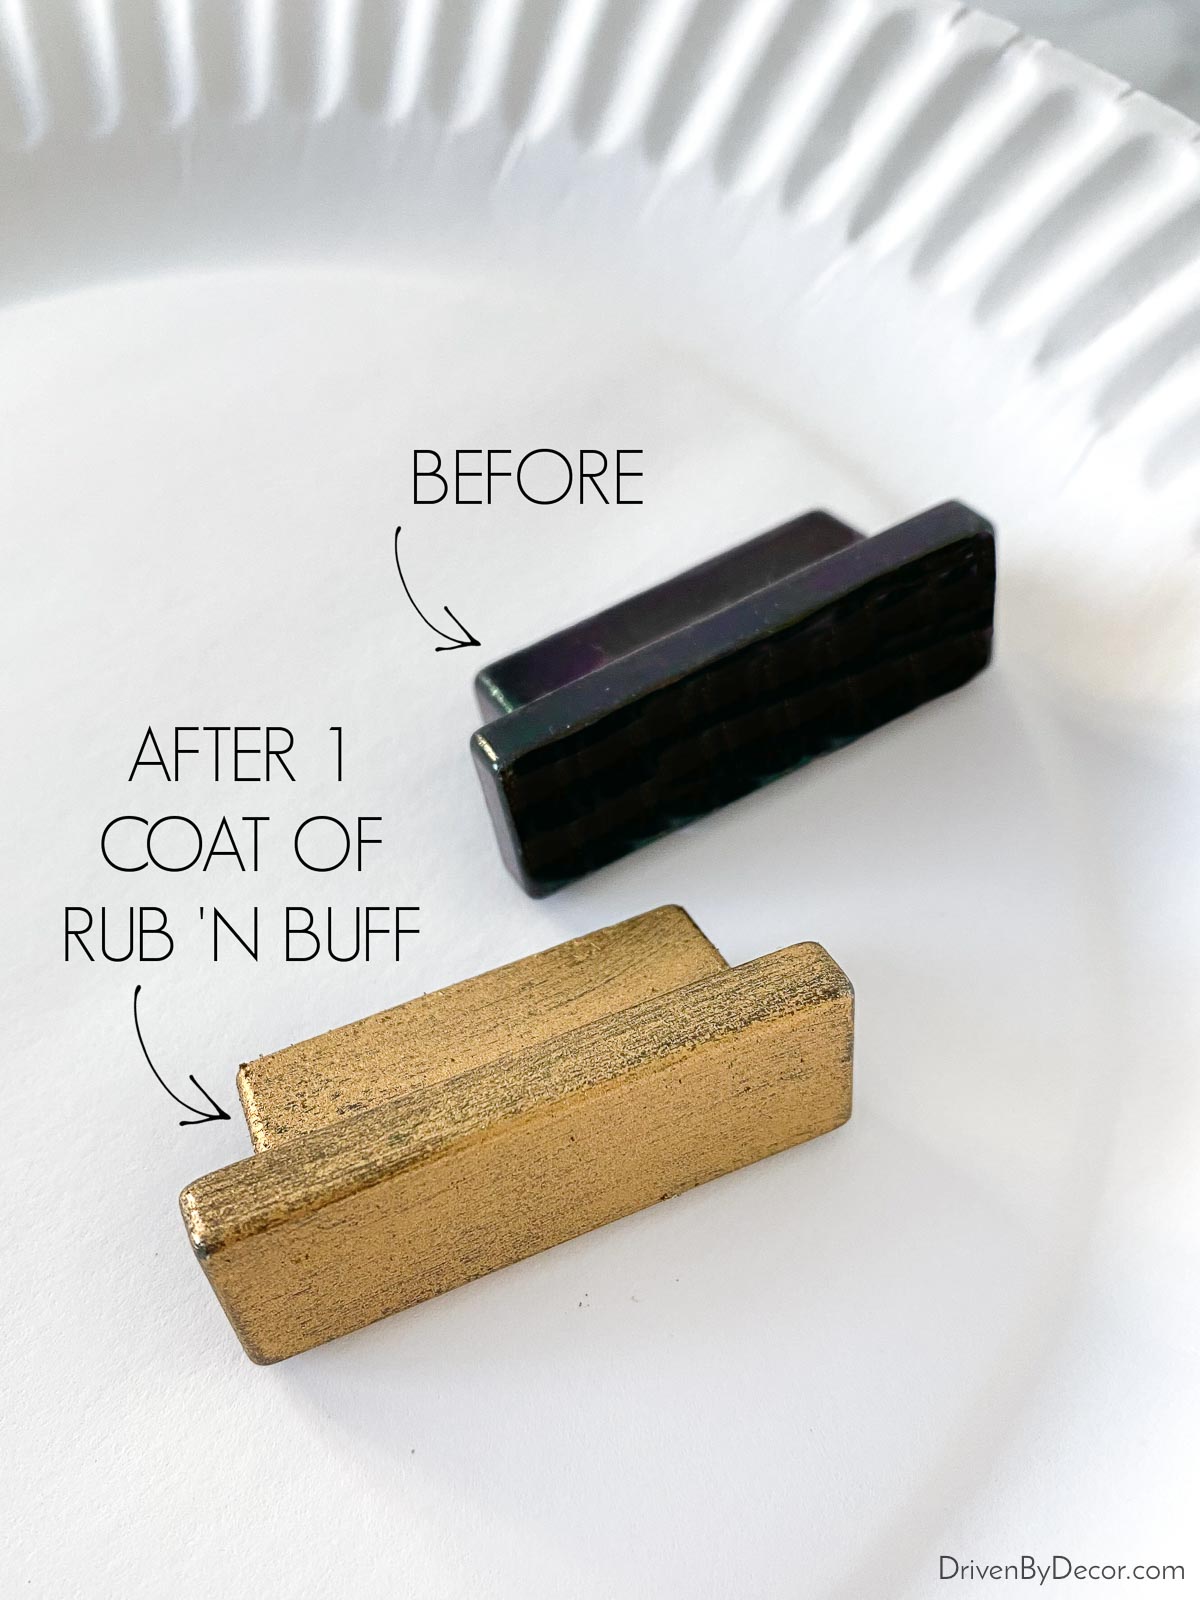 What Are Some Uses for Rub 'n Buff? 